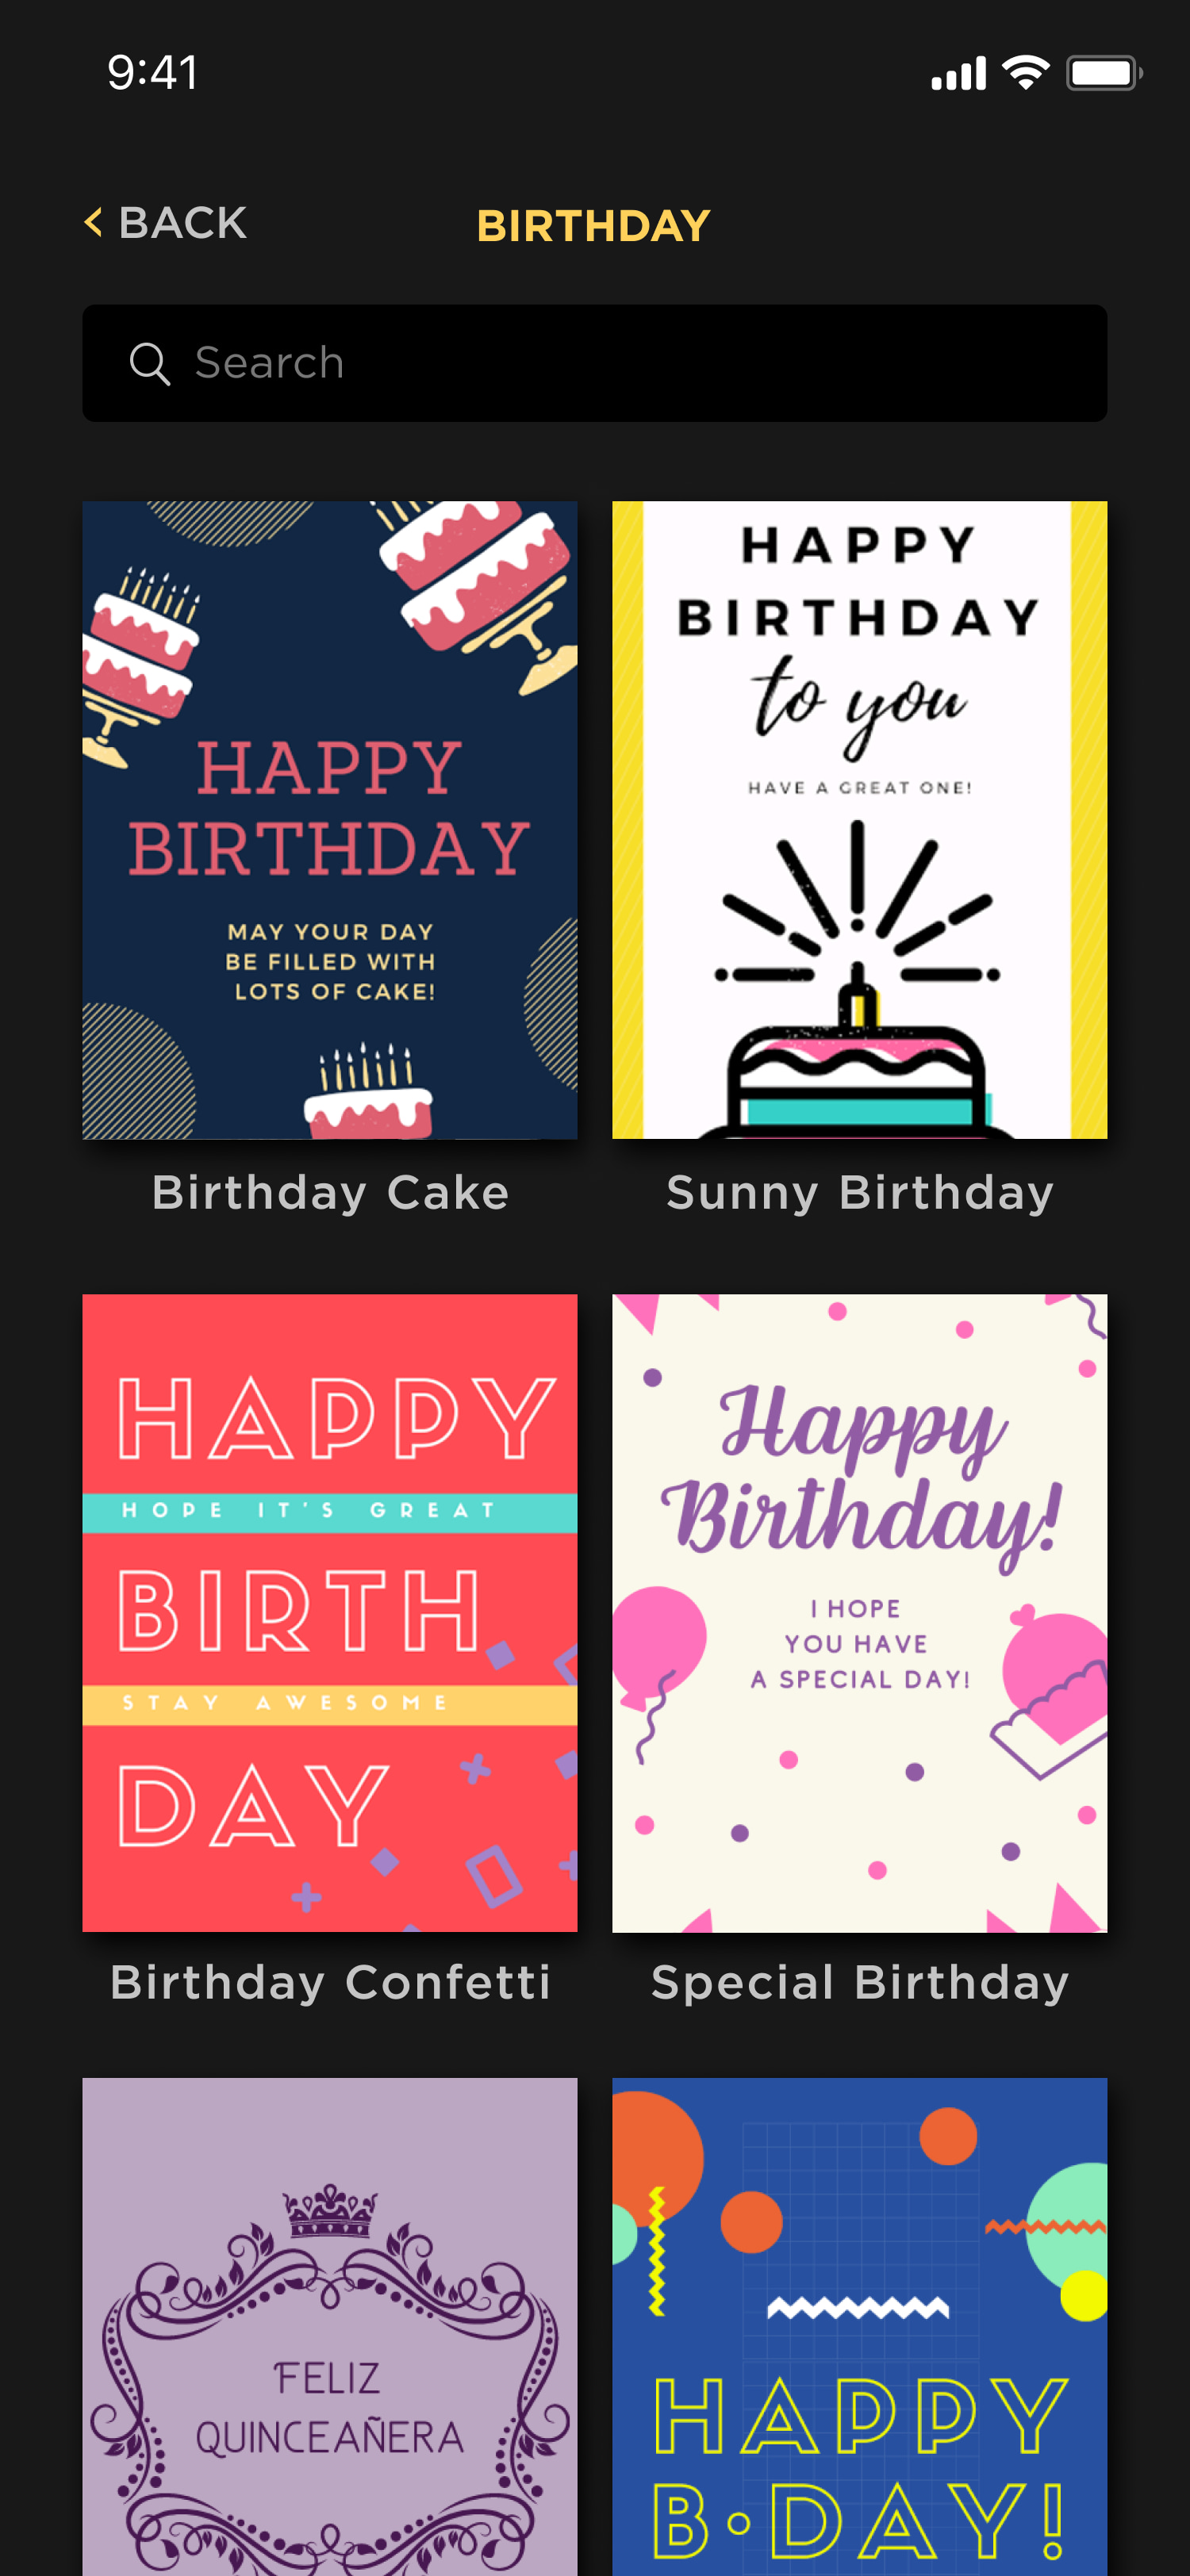 CircleIt is a family platform with private chat and greeting cards